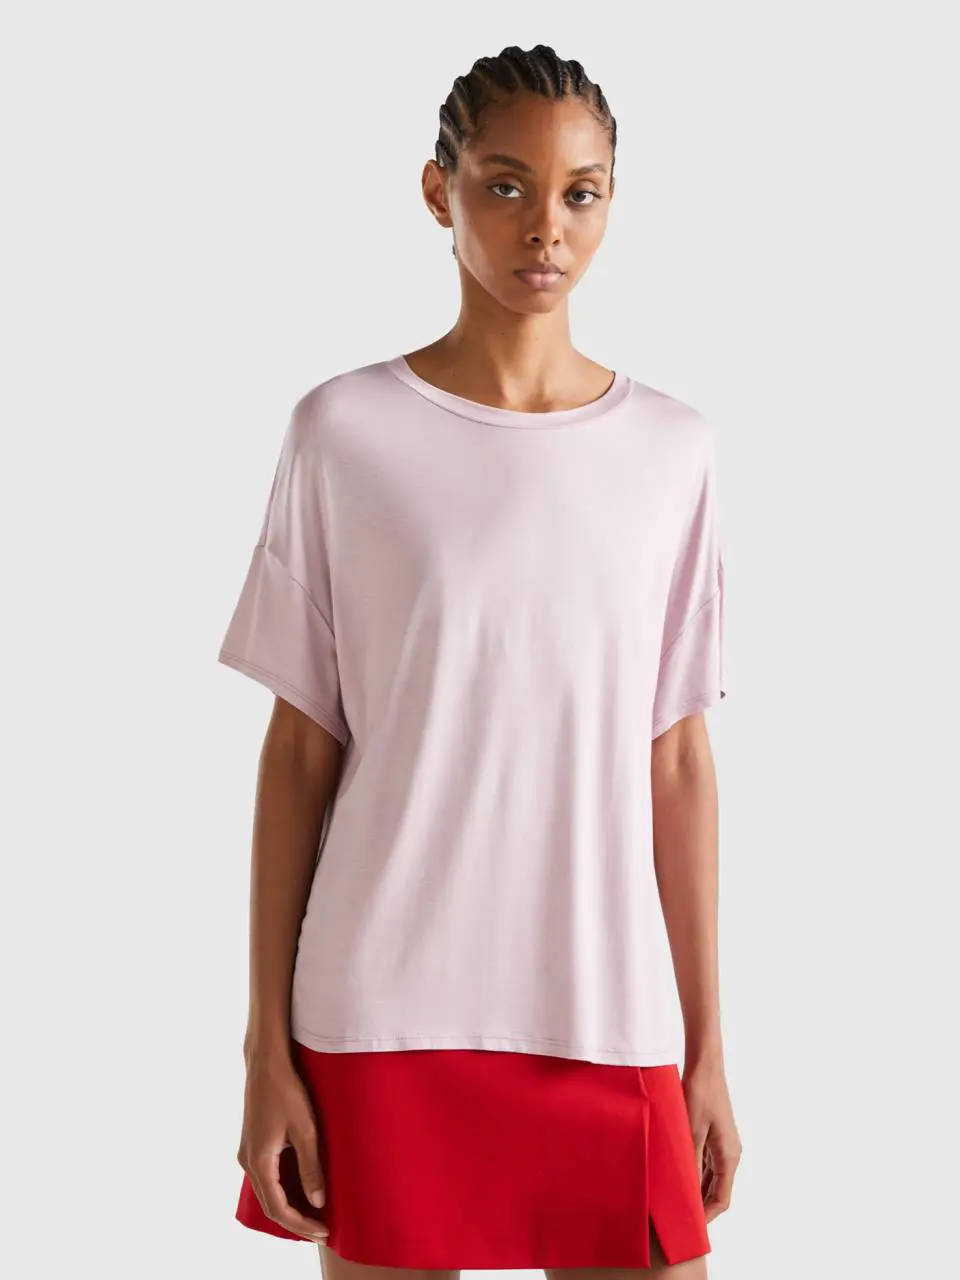 Benetton t-shirt in sustainable stretch viscose. 1